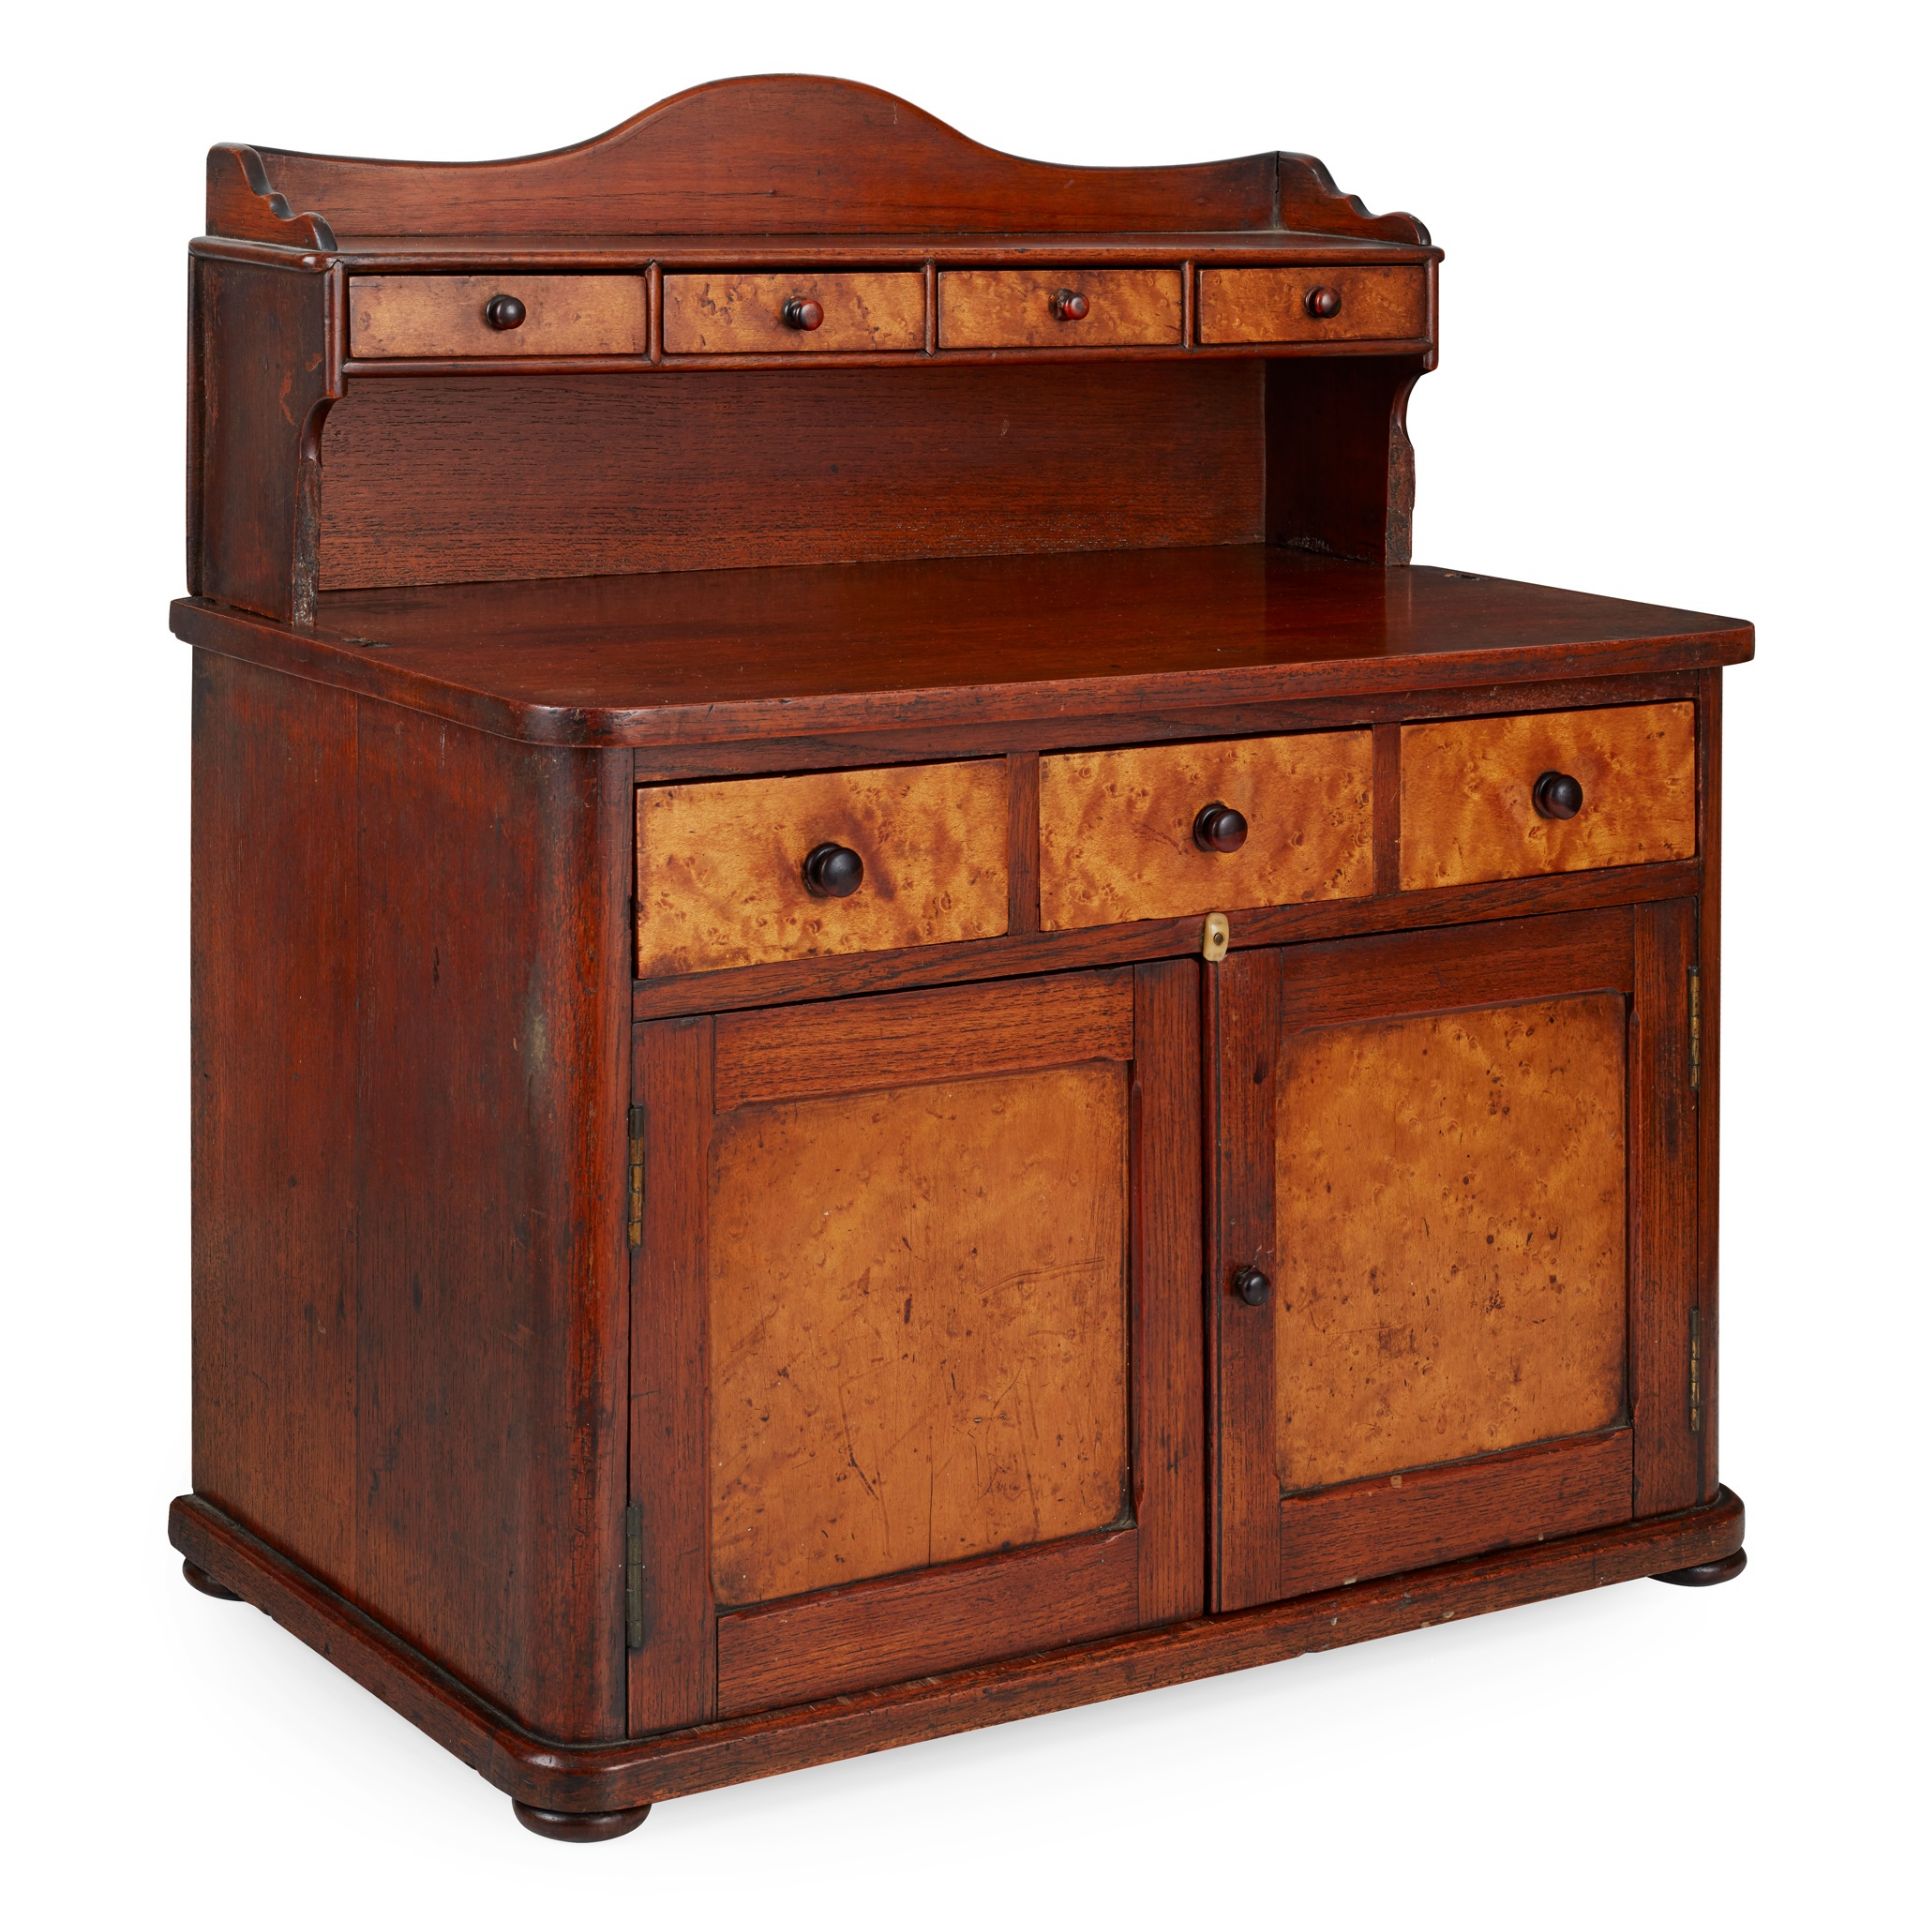 EARLY VICTORIAN BEECH, BIRCH, AND MAPLE MINIATURE DRESSER MID-19TH CENTURY